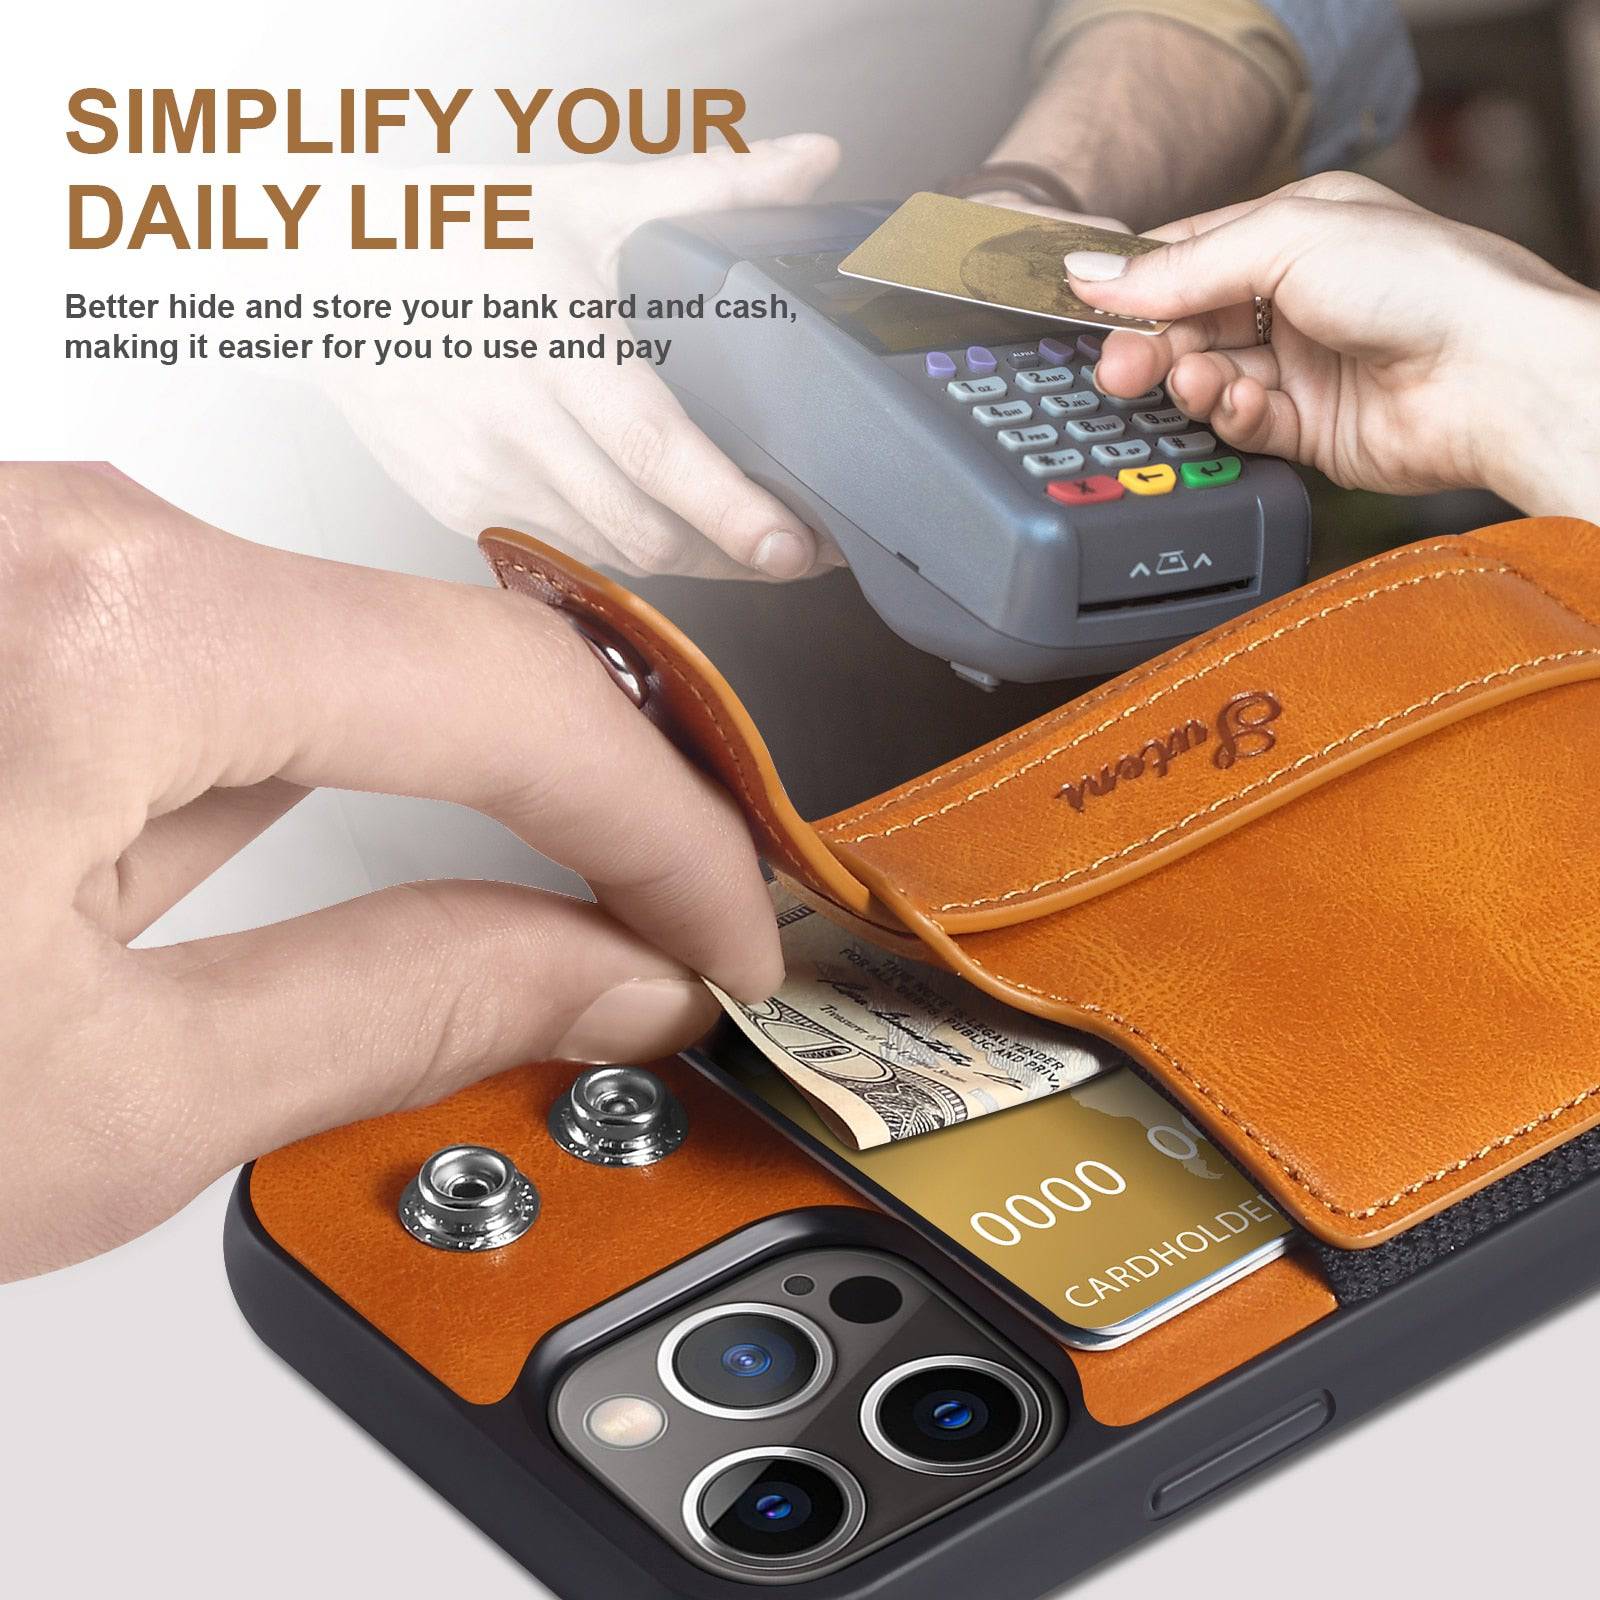 Luxury Case Leather Wallet Cover With Wrist Strap Stand Feature Credit Cards Pocket - sky-cover